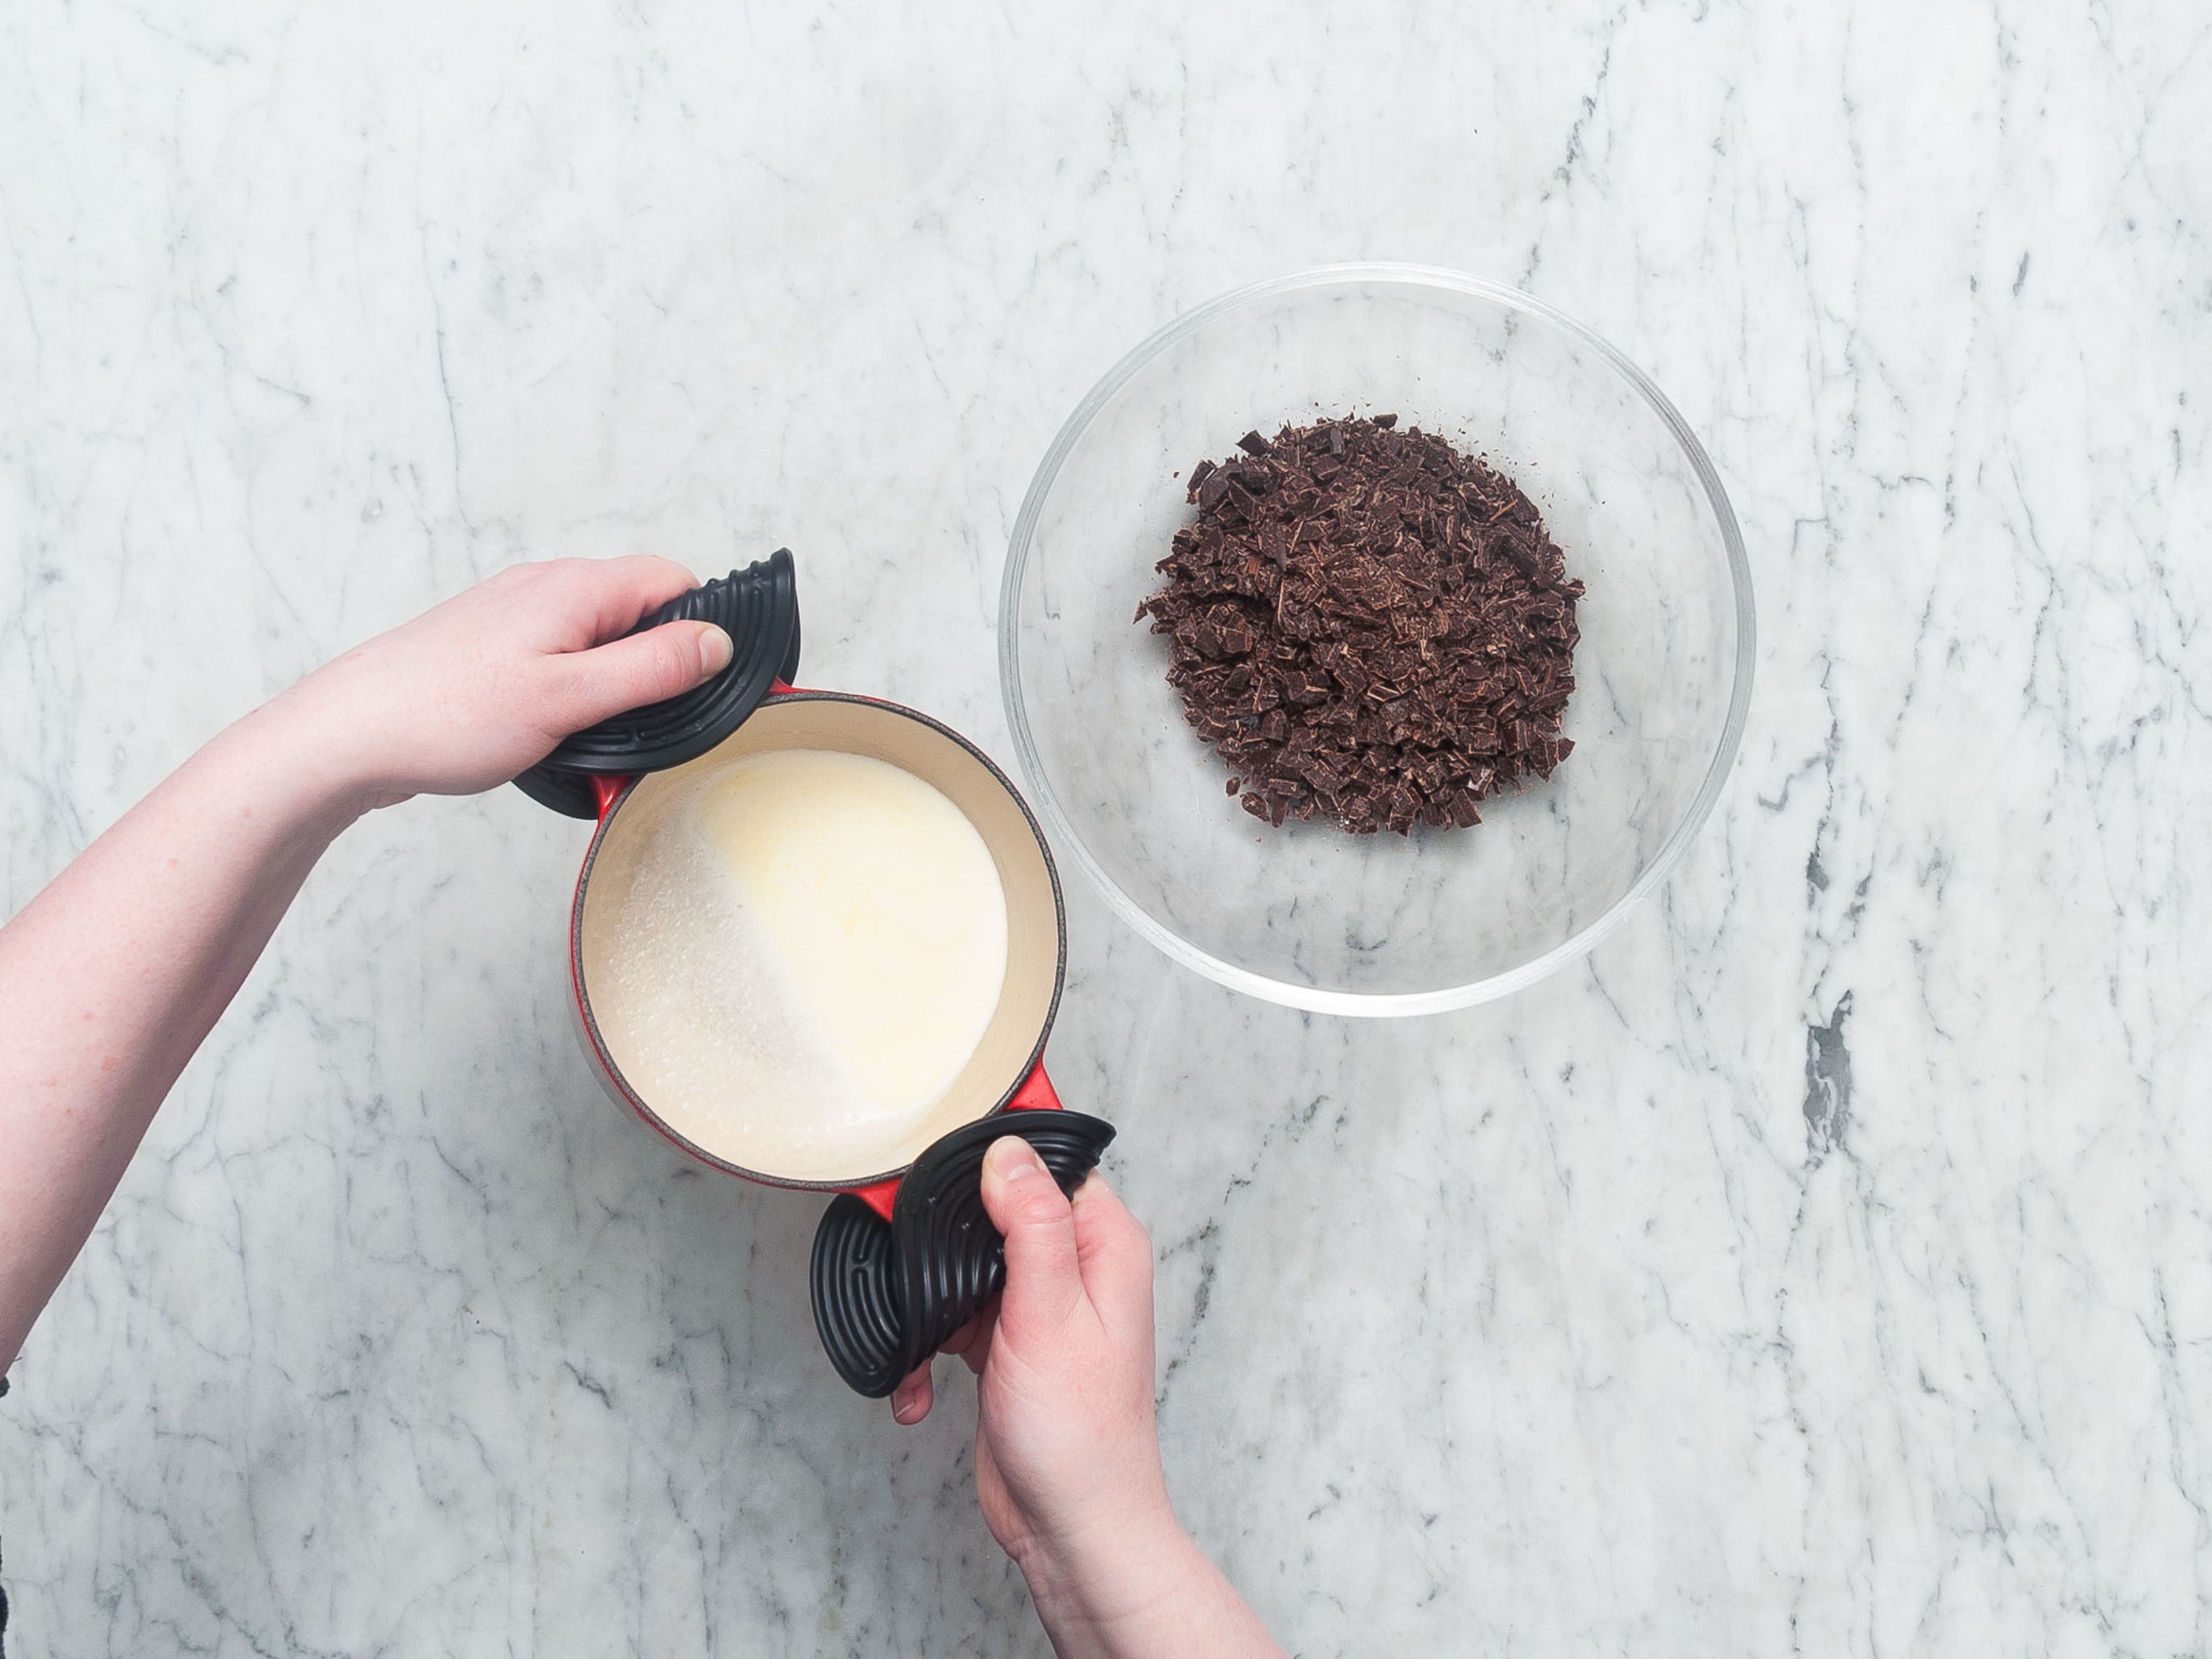 Chop chocolate and add to a bowl. Scald cream in a small saucepan and pour over chopped chocolate. Stir to combine, then let cool at room temperature.